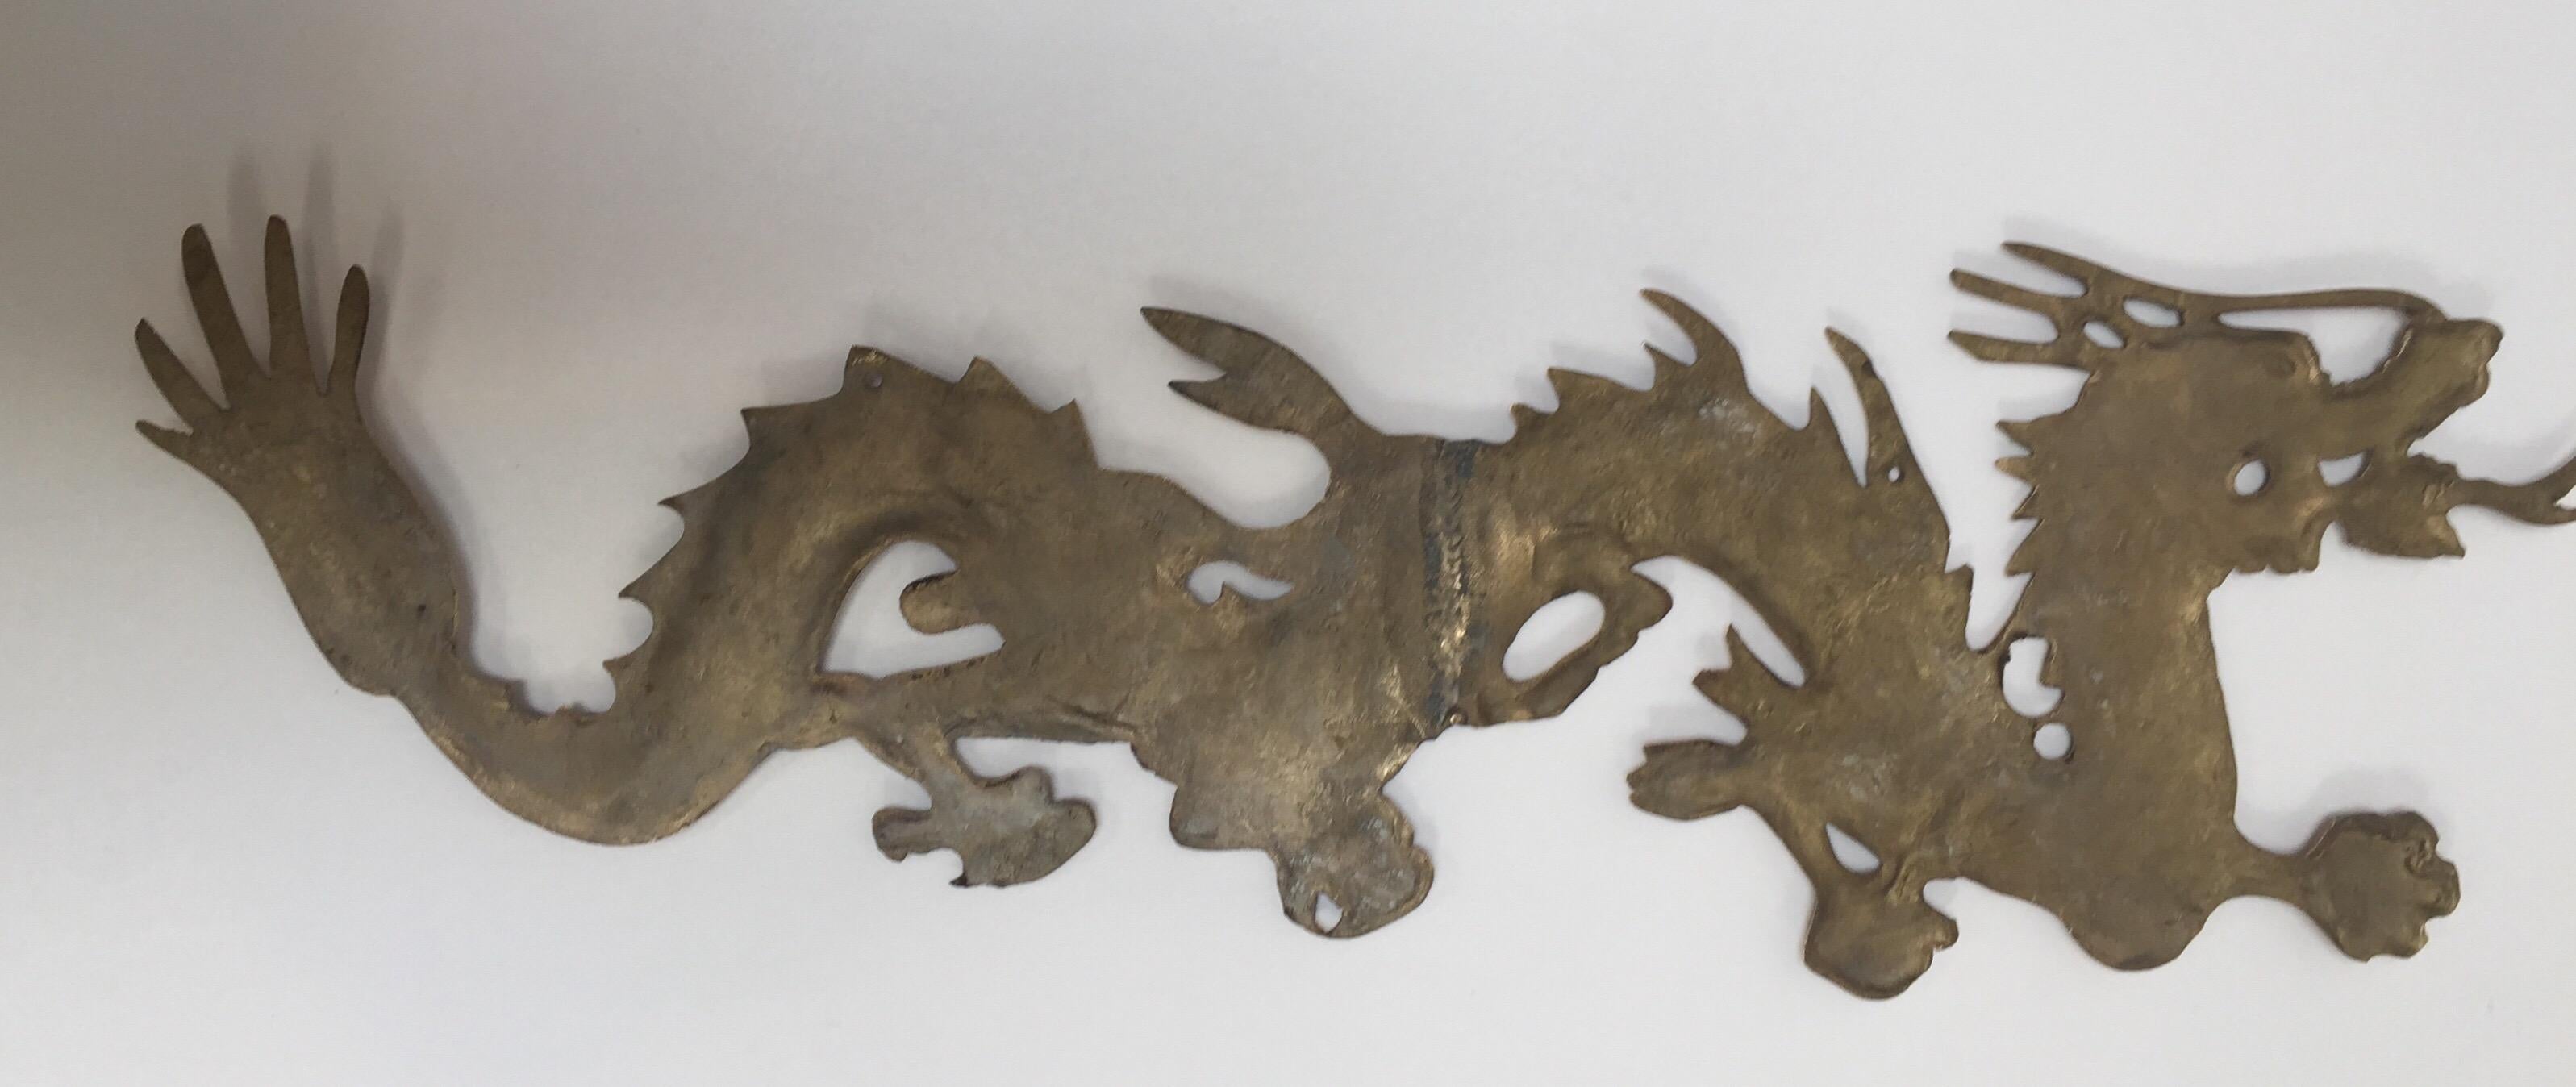 Large Pair of Asian Cast Brass Dragons Chasing a Ball Wall Mount 12